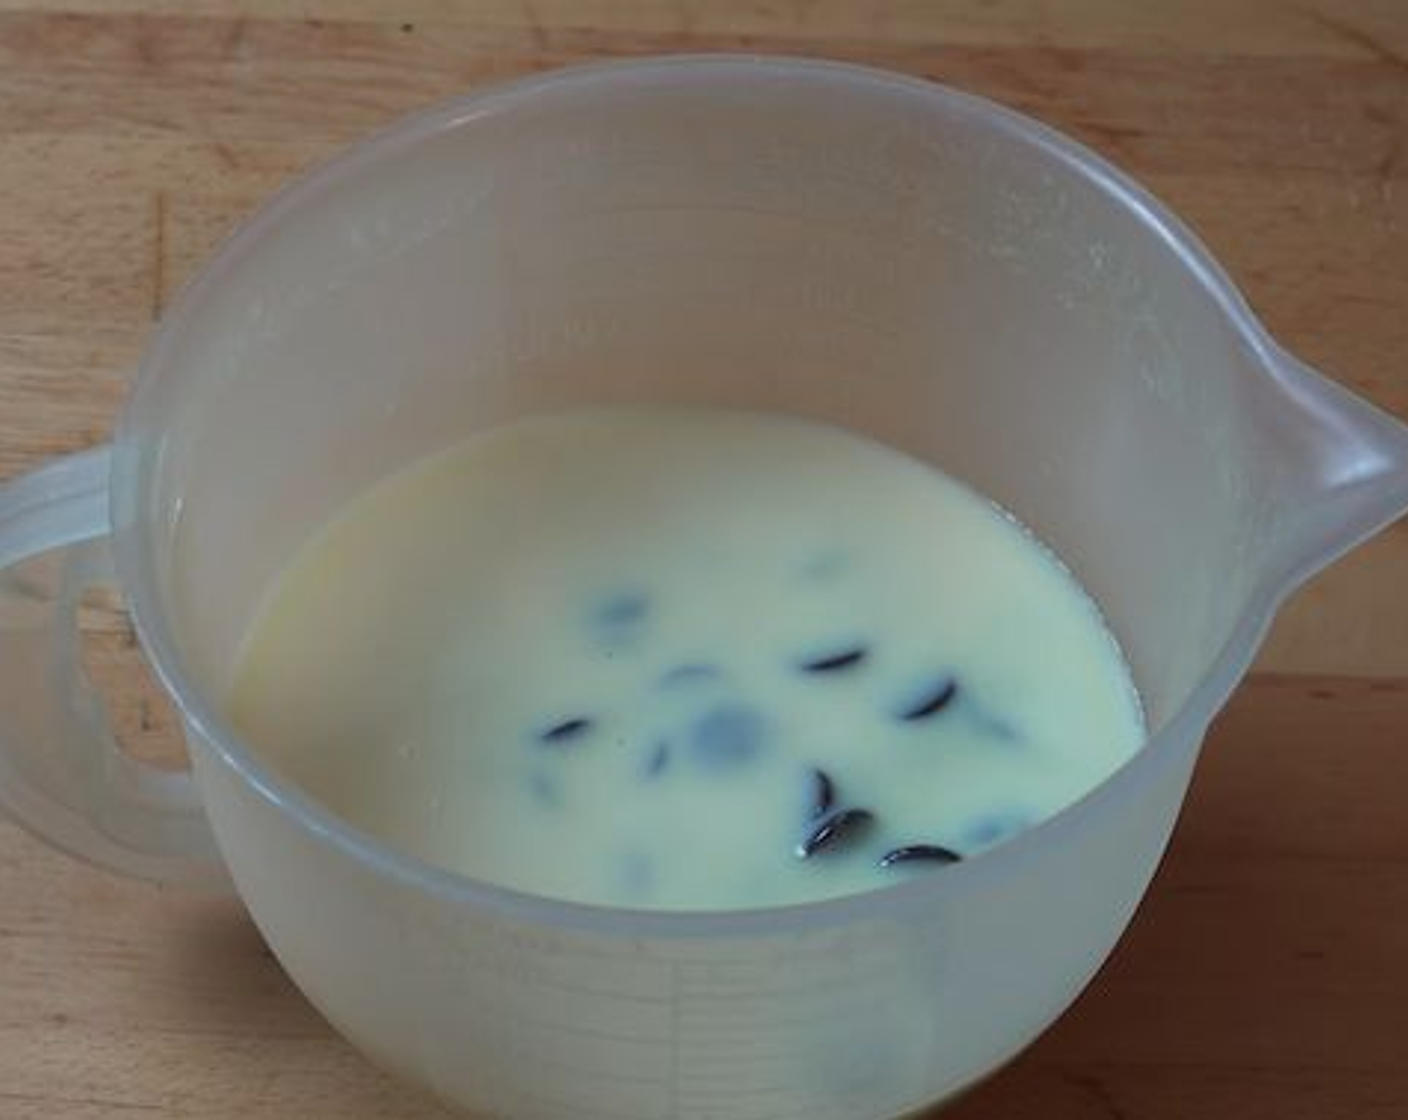 step 2 In a microwave-safe bowl add Dark Chocolate (1 2/3 cups) and Sweetened Condensed Milk (1 can) poured right over the top. Place in the microwave for 1 minute on high.